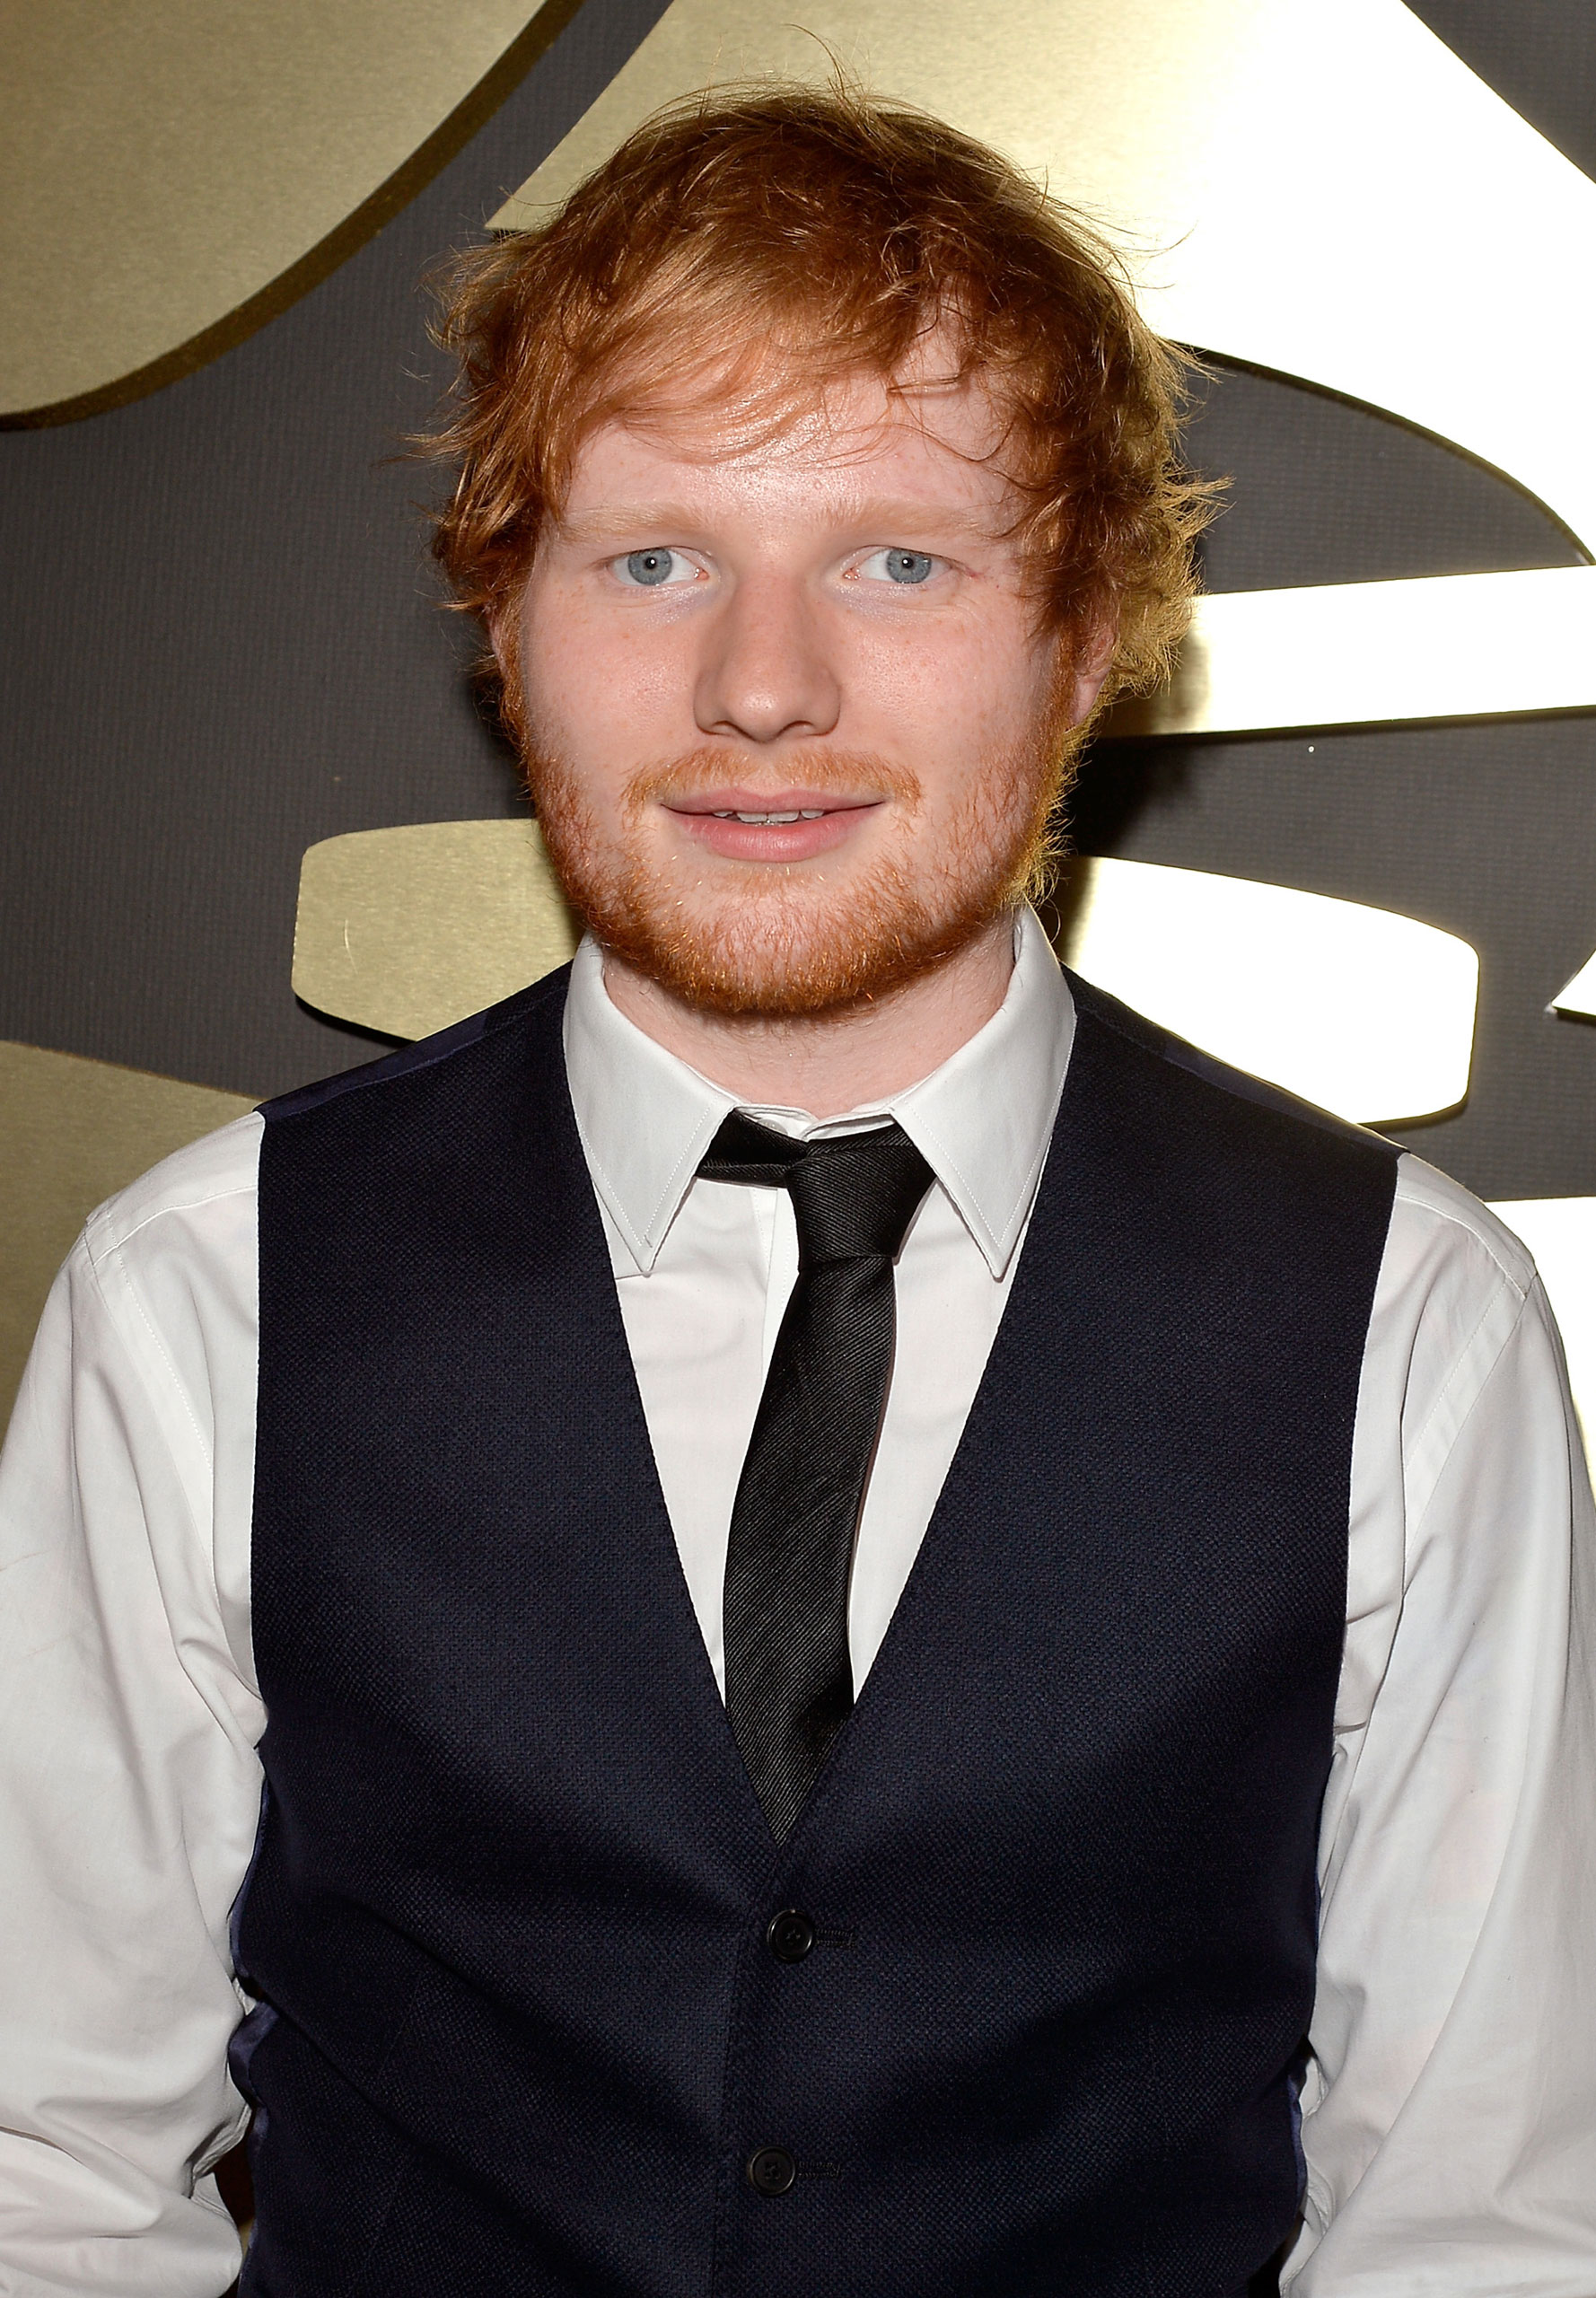 Ed Sheeran attends the 57th annual GRAMMY Awards at the STAPLES Center on February 8, 2015 in Los Angeles, California. (Lester Cohen—WireImage/Getty Images)